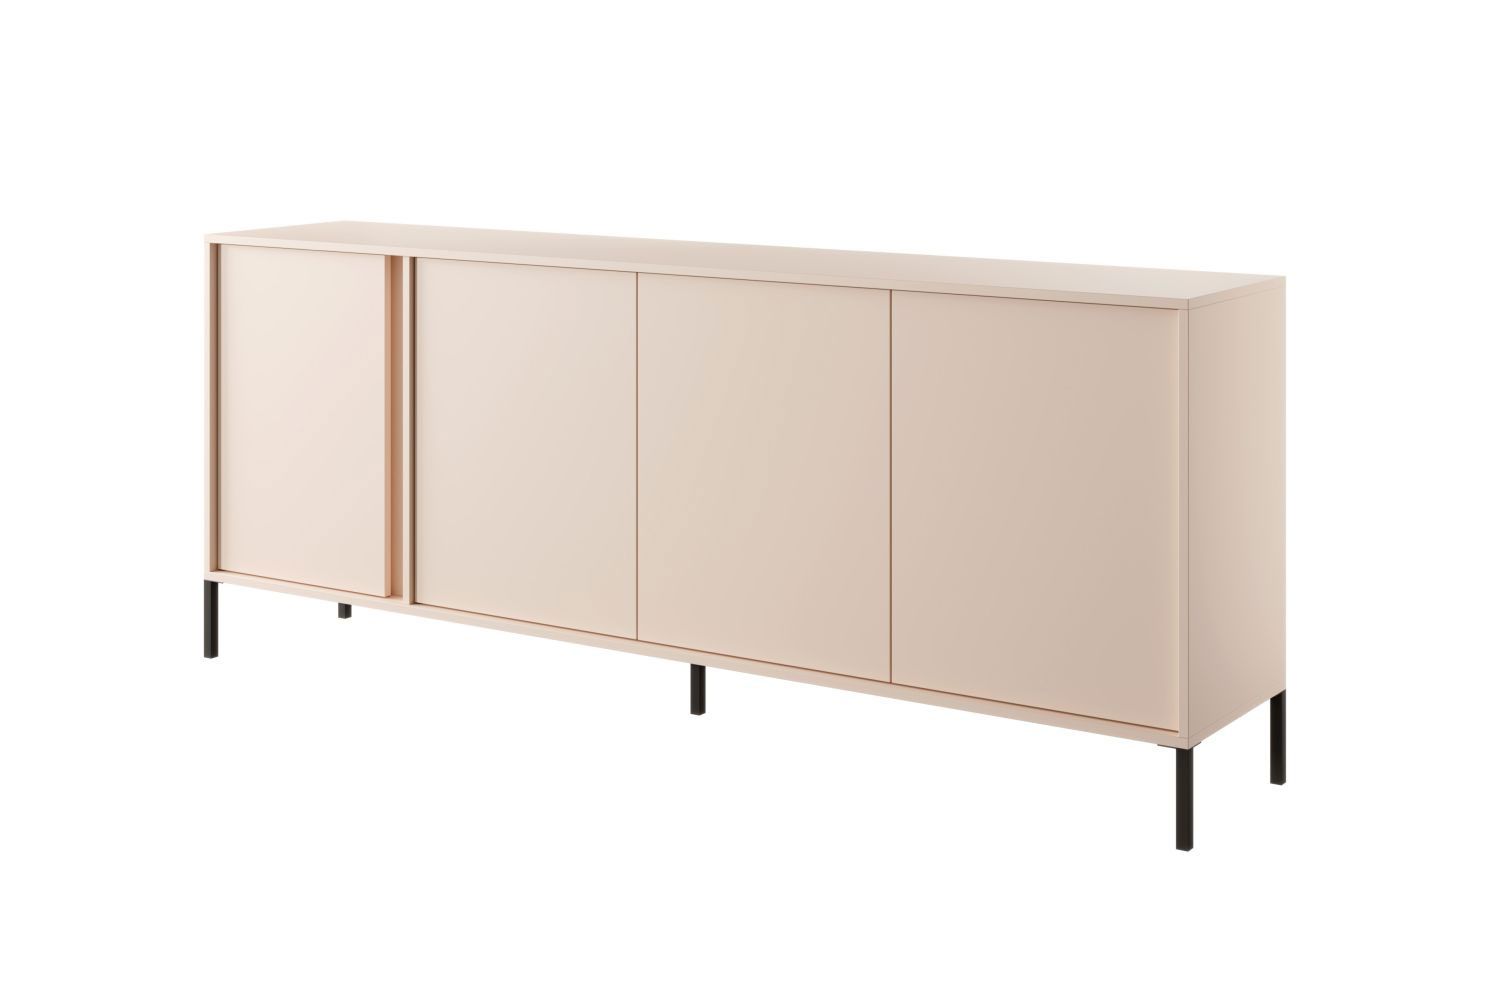 Long chest of drawers with ample storage space Zaghouan 08, color: Beige - Dimensions: 81.5 x 202.9 x 39.5 cm (H x W x D)